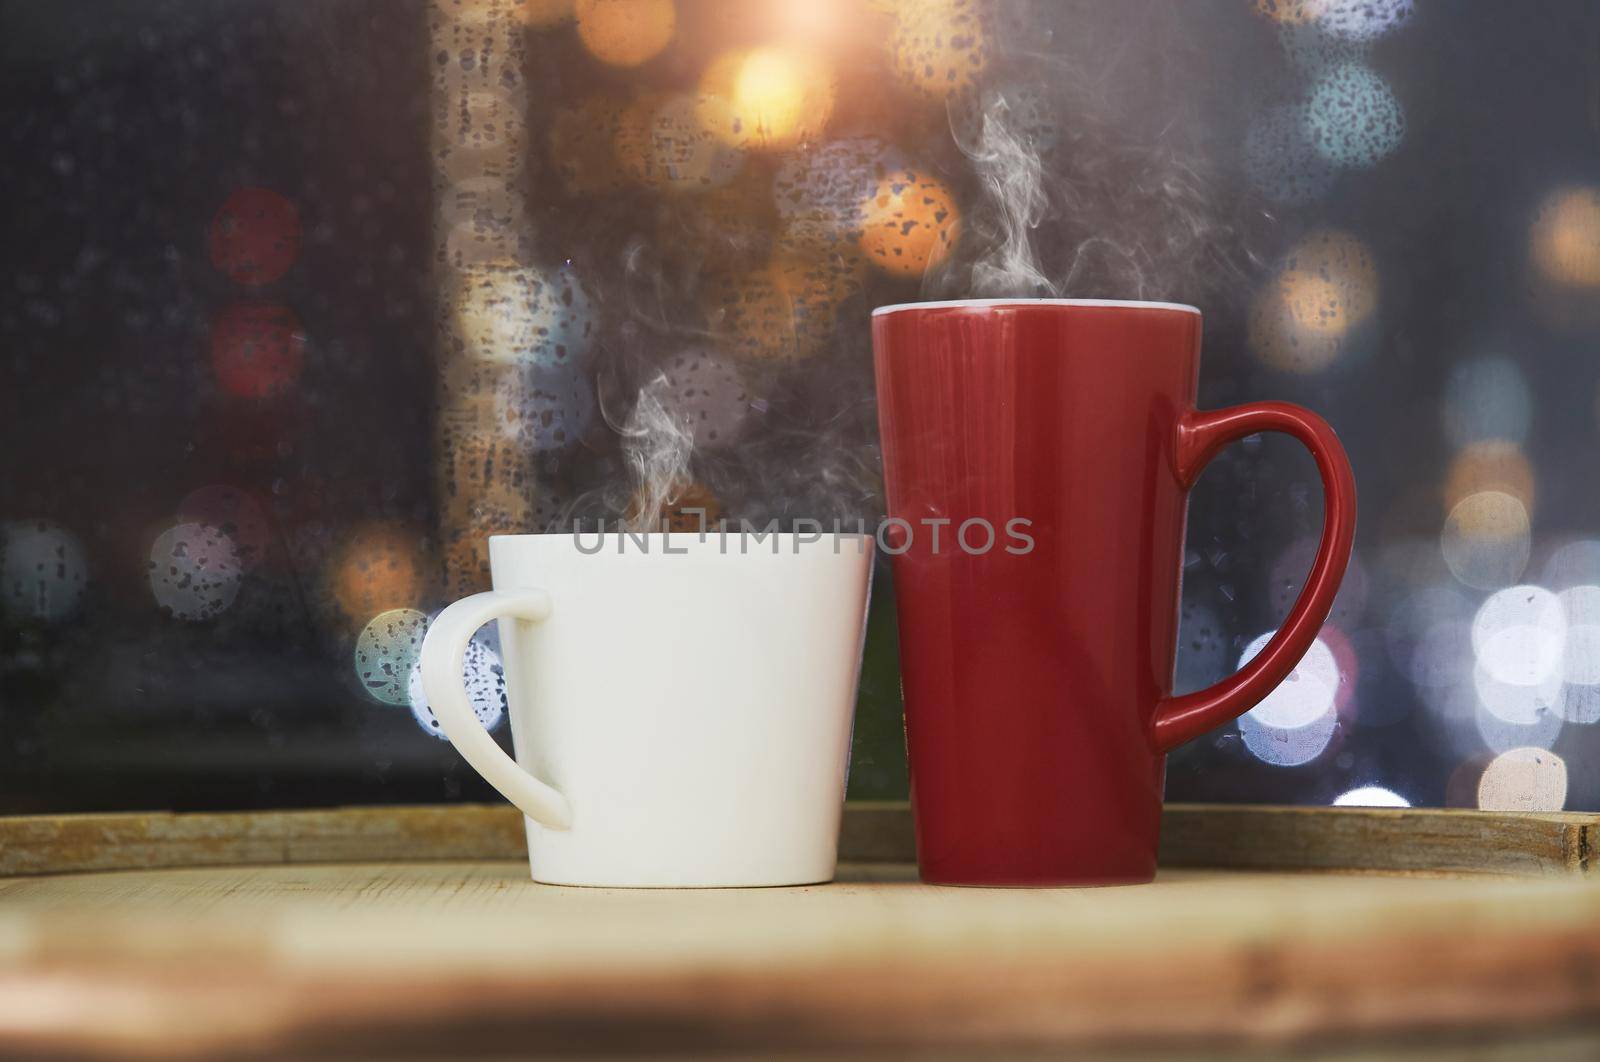 Have a relaxing coffee in the house with the rain by the window. 